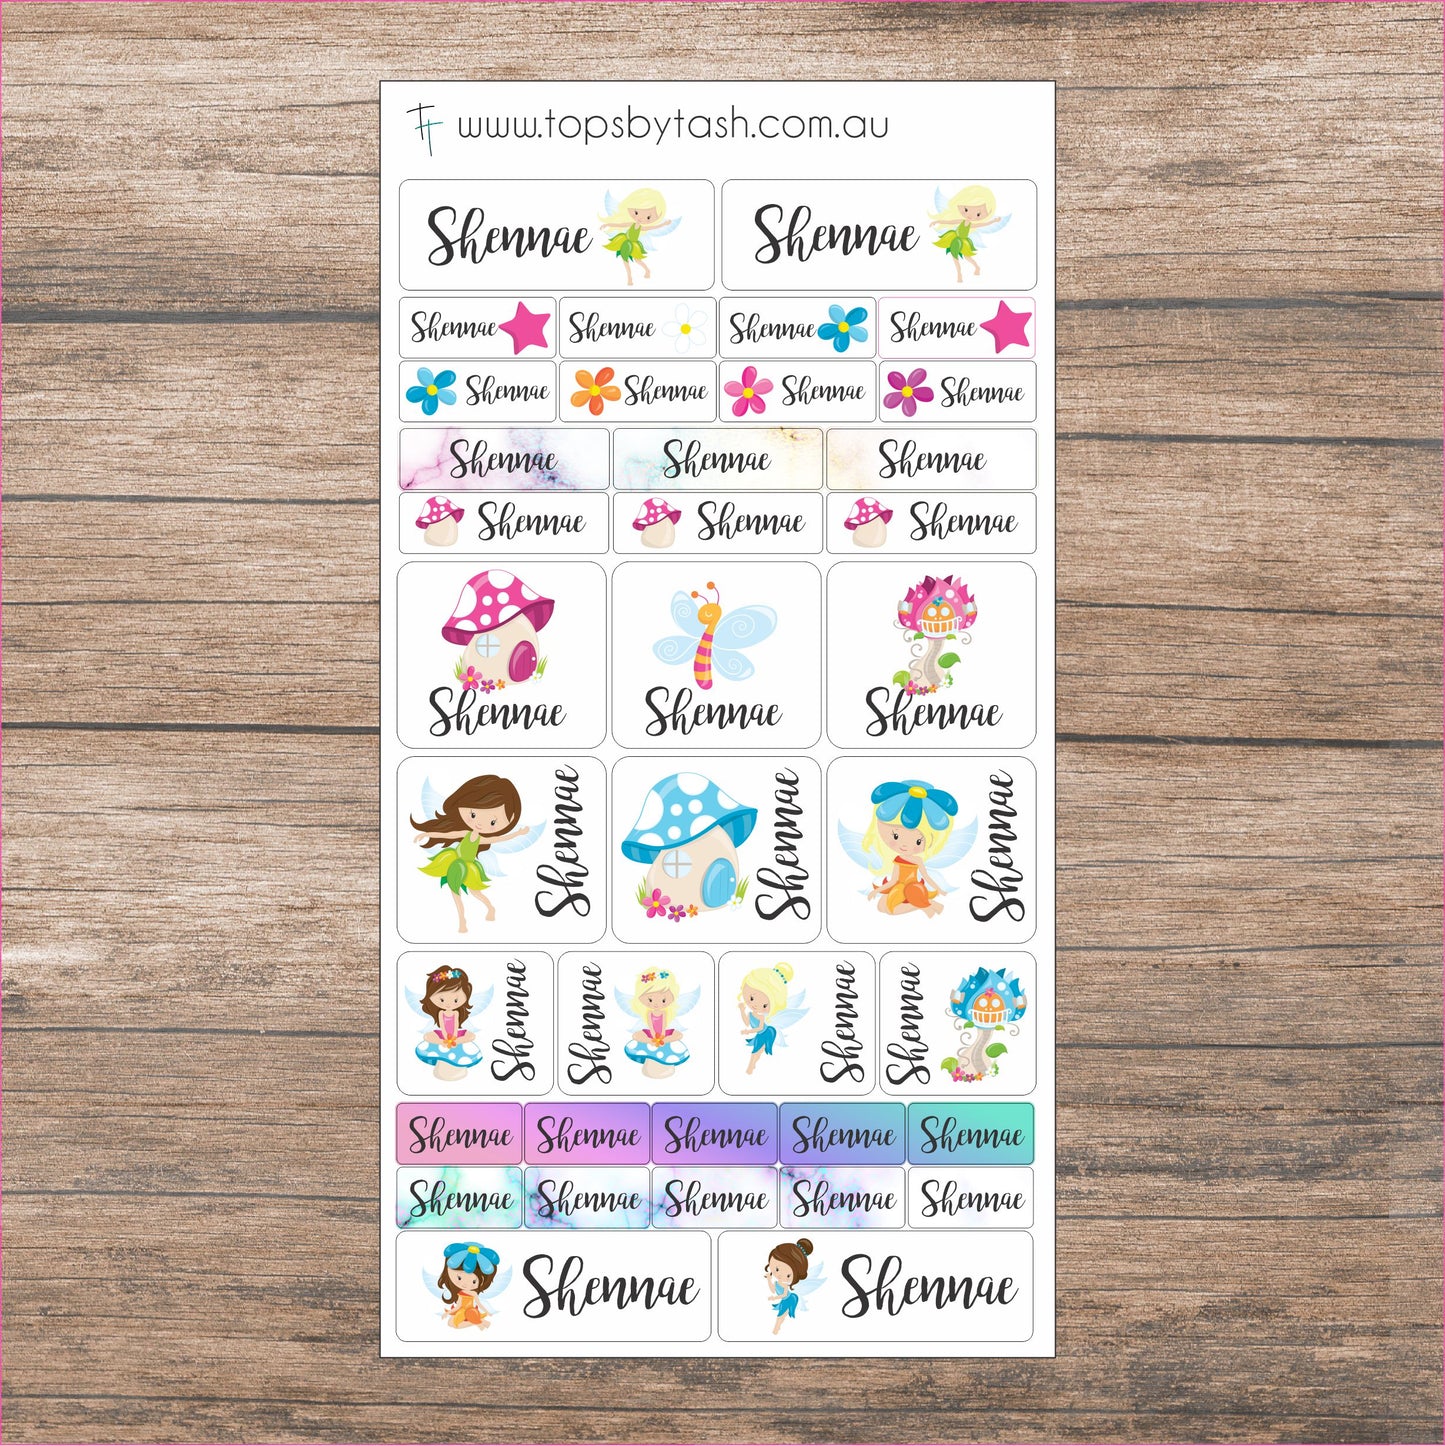 Name Label sticker sheets - mixed size sheets - Many themes!